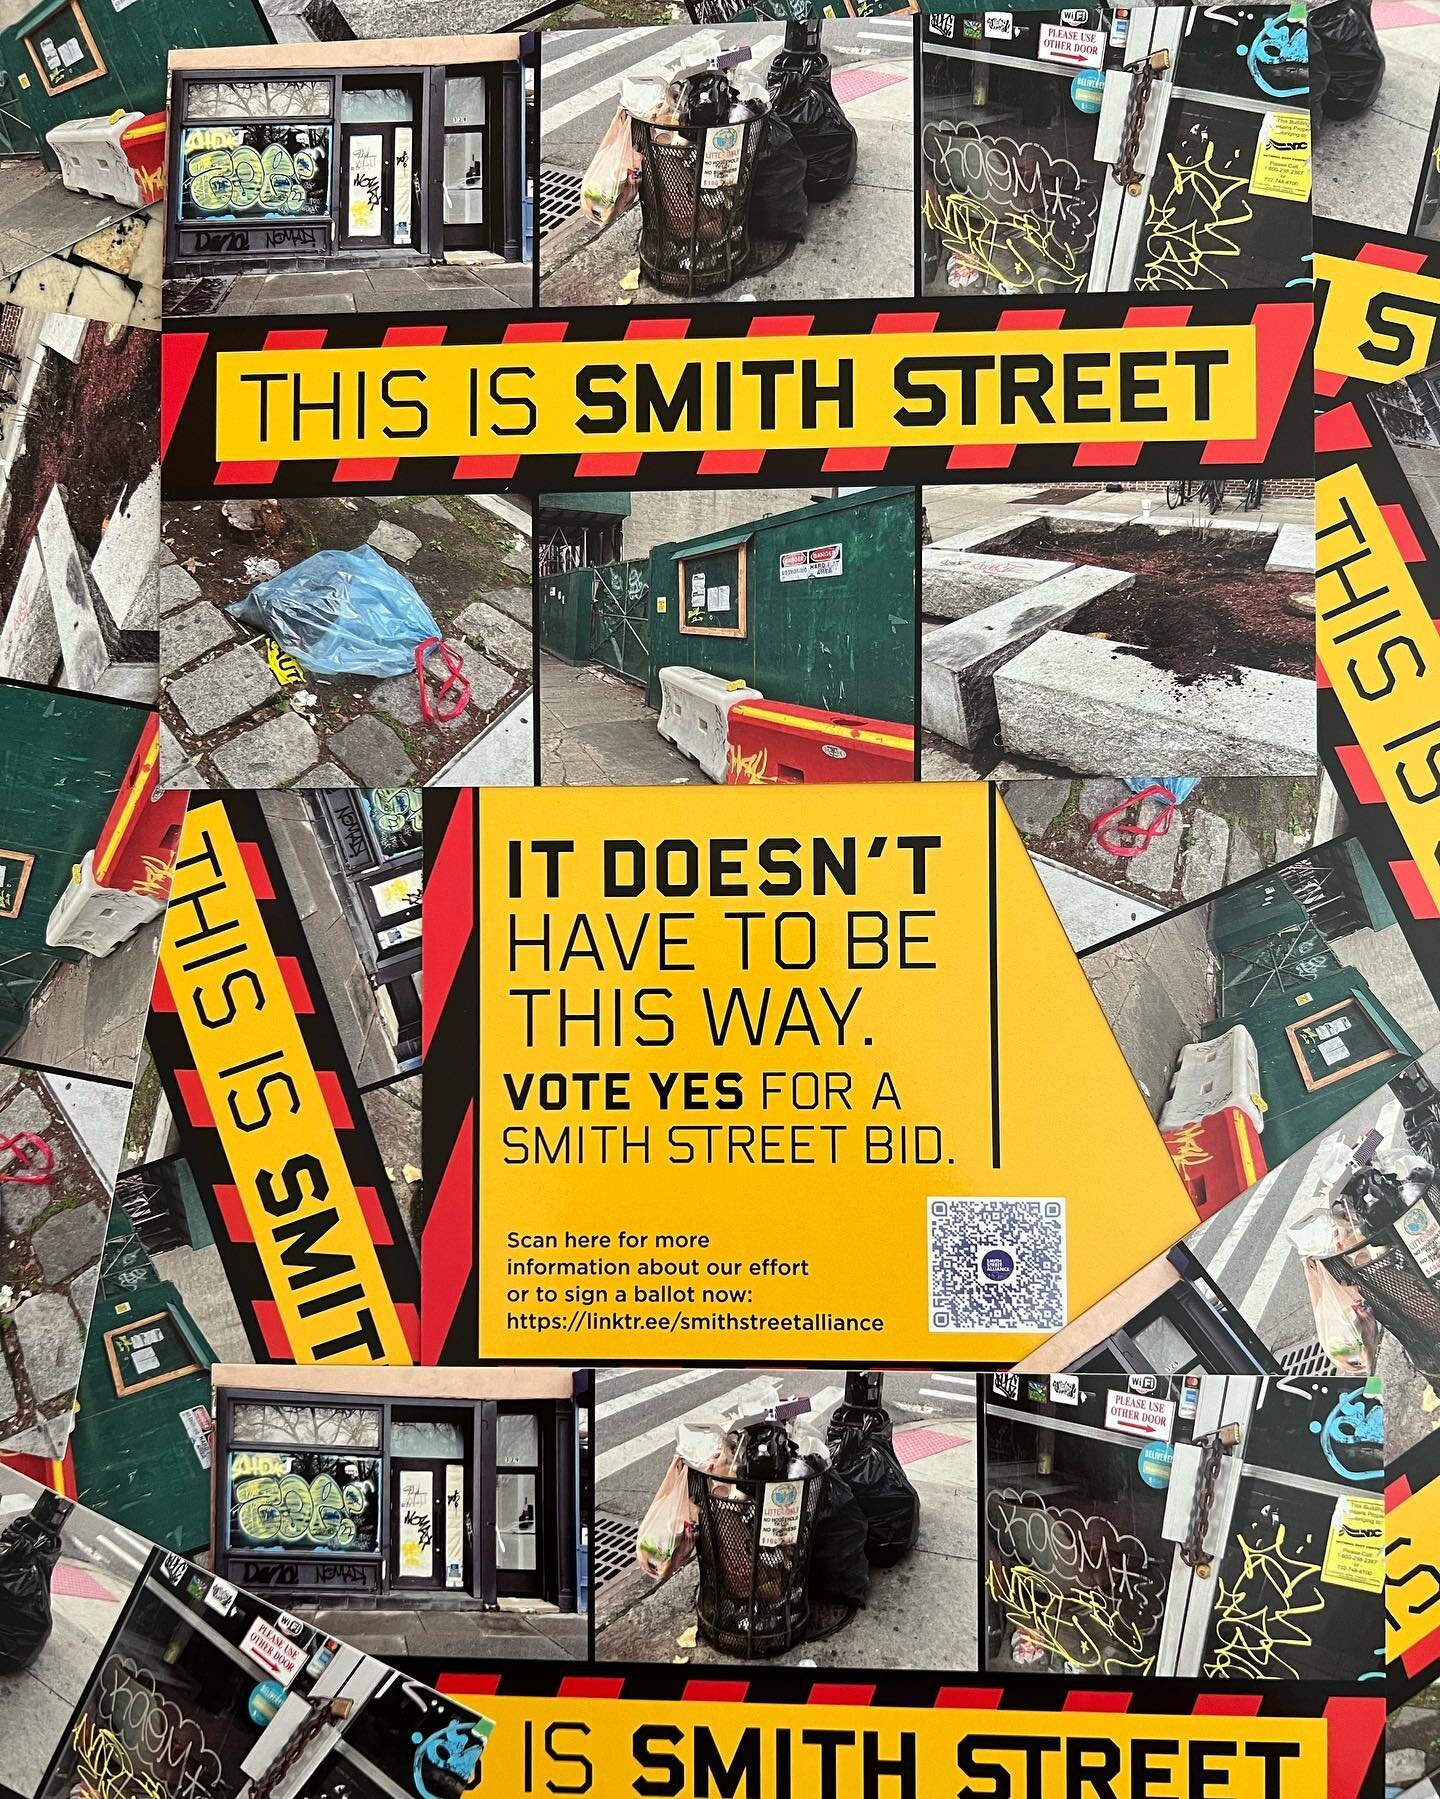 Our latest postcard is in the mail. VOTE YES now for a Smith Street BID. What am I talking about?? Go here linktr.ee/smithstreetalliance #betterwithabid #lovesmuthstreet #voteyesnow